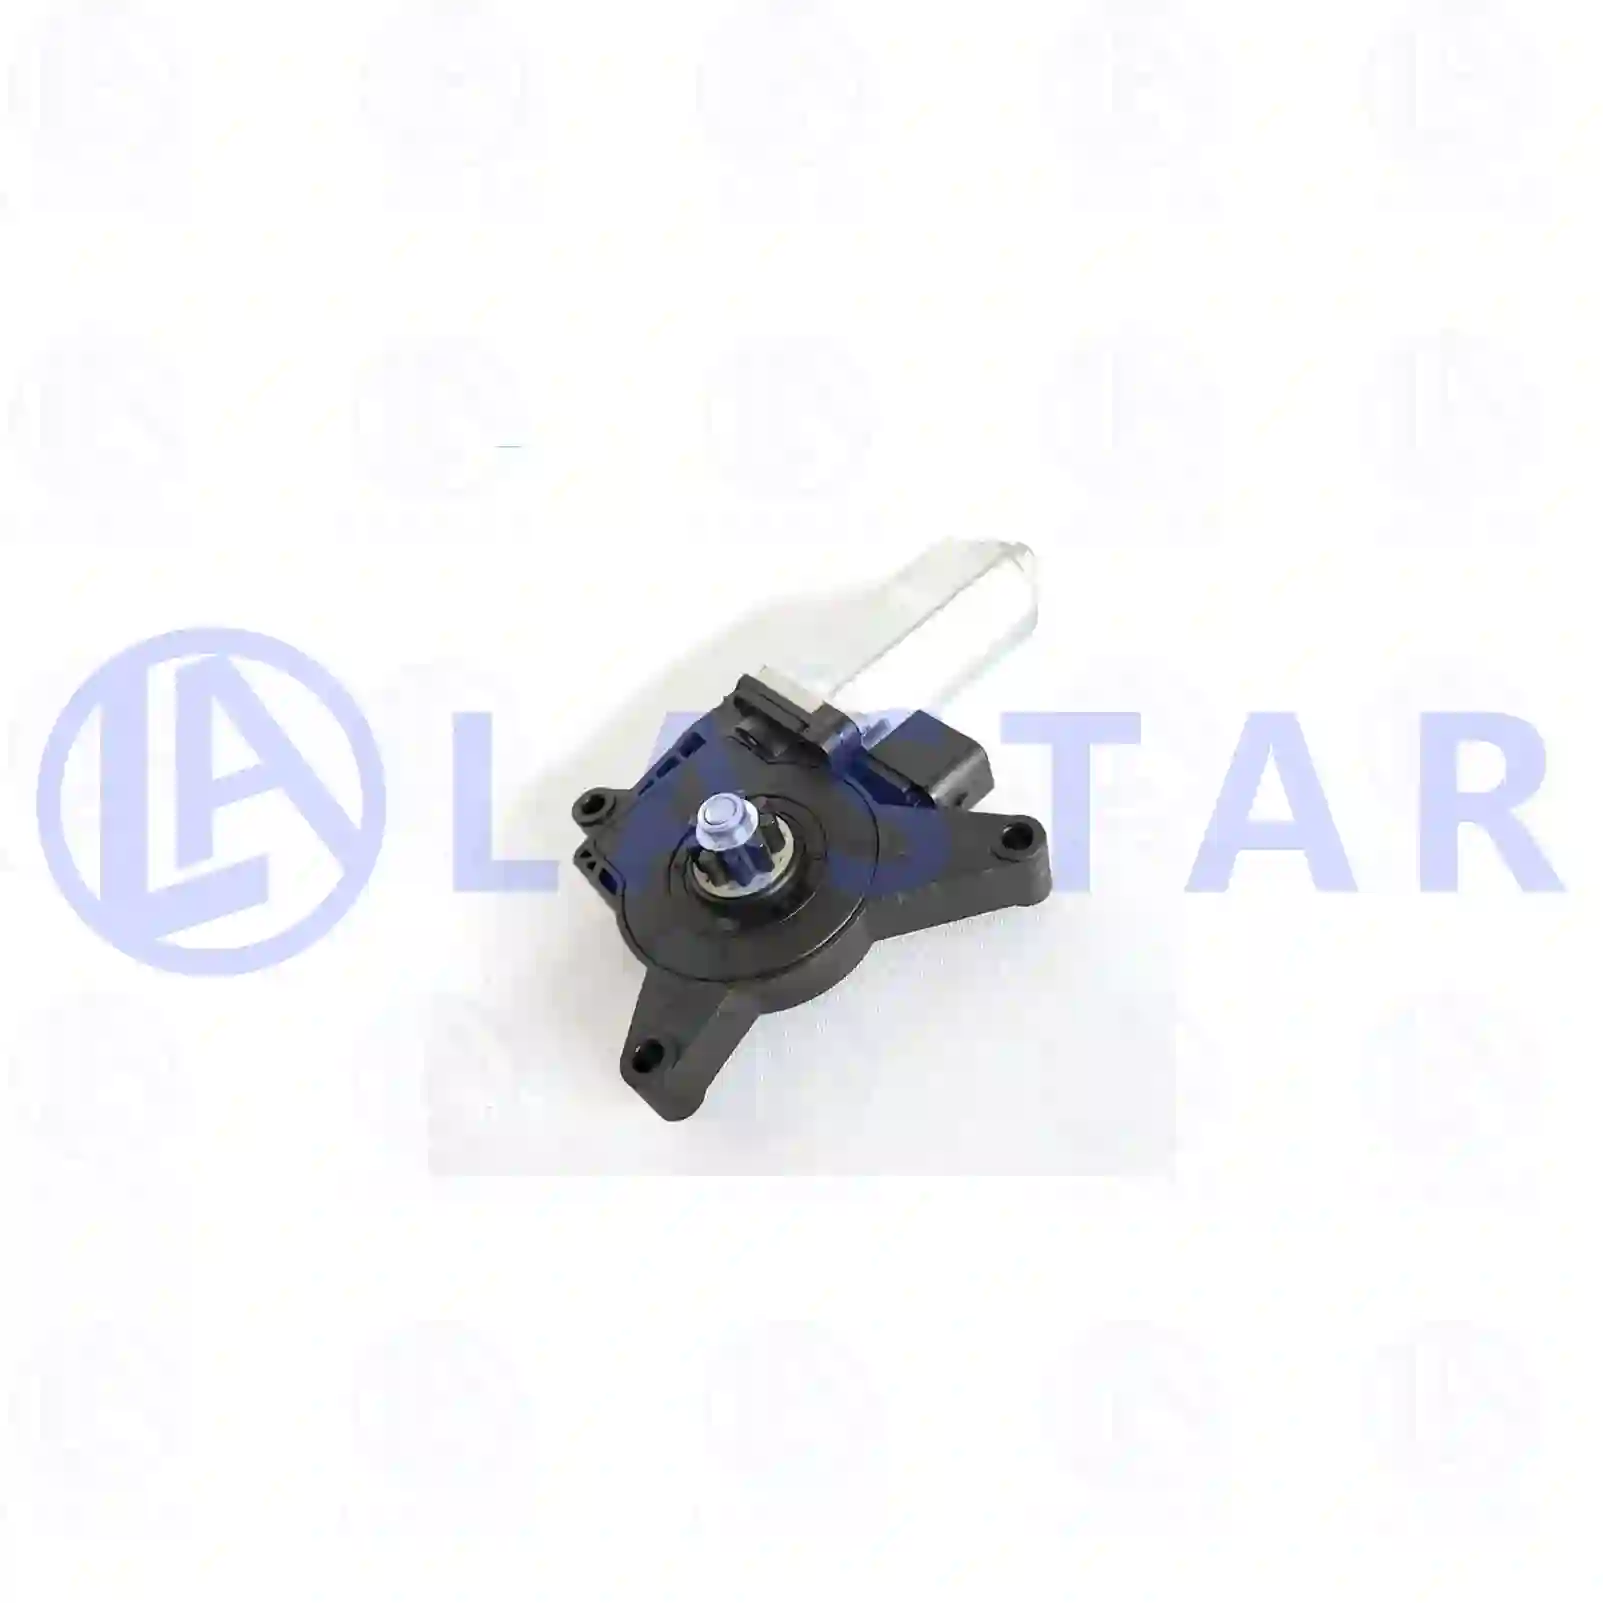 Window lifter motor, right, 77719083, 0008202708, 0008205208, ZG61282-0008 ||  77719083 Lastar Spare Part | Truck Spare Parts, Auotomotive Spare Parts Window lifter motor, right, 77719083, 0008202708, 0008205208, ZG61282-0008 ||  77719083 Lastar Spare Part | Truck Spare Parts, Auotomotive Spare Parts